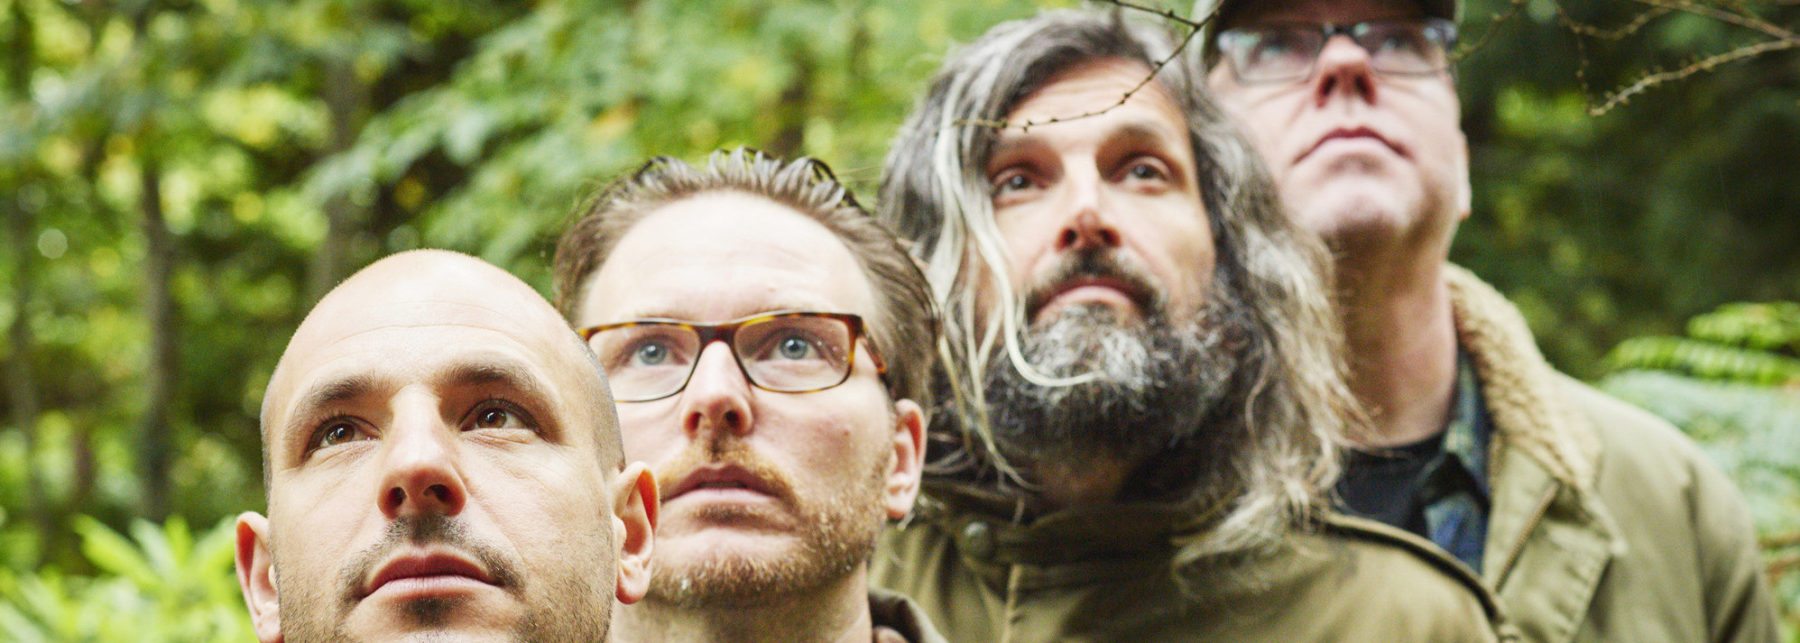 Straight for the Jugular: In conversation with Turin Brakes - The Boar